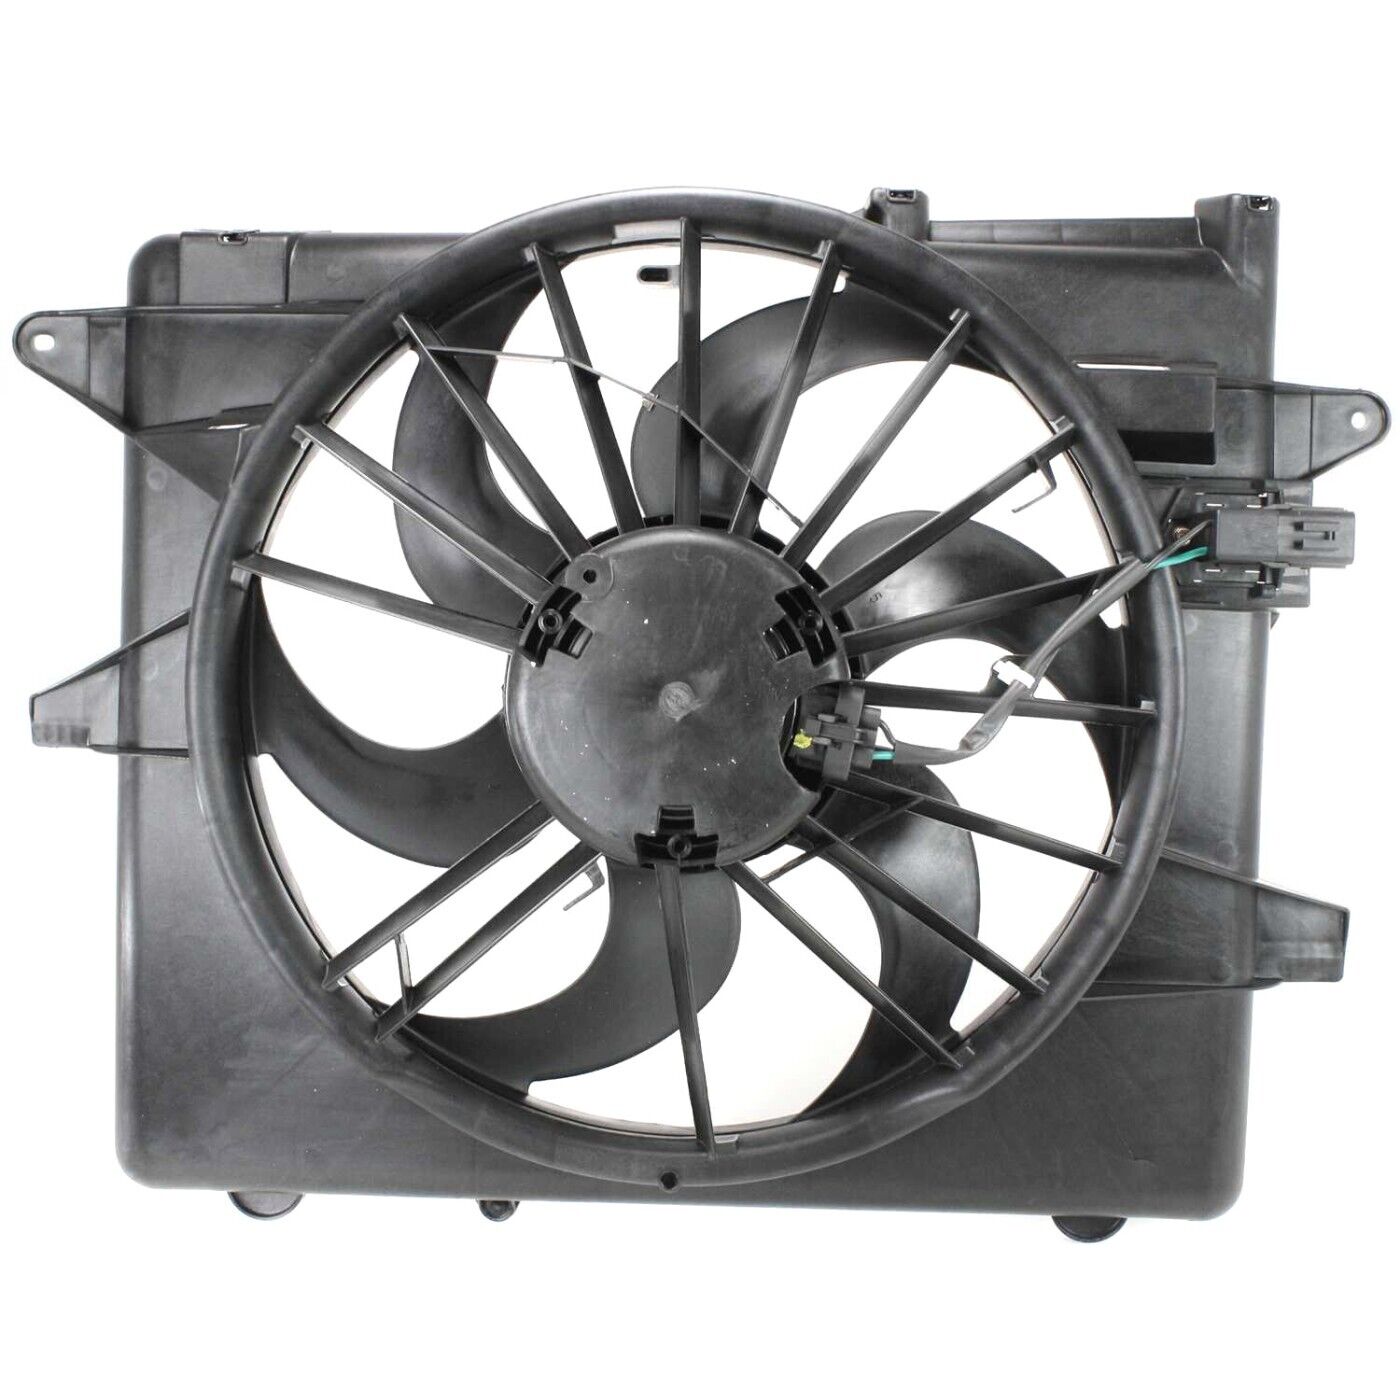 Radiator Cooling Fan For 2005-2014 Ford Mustang with Blade Motor and Shroud